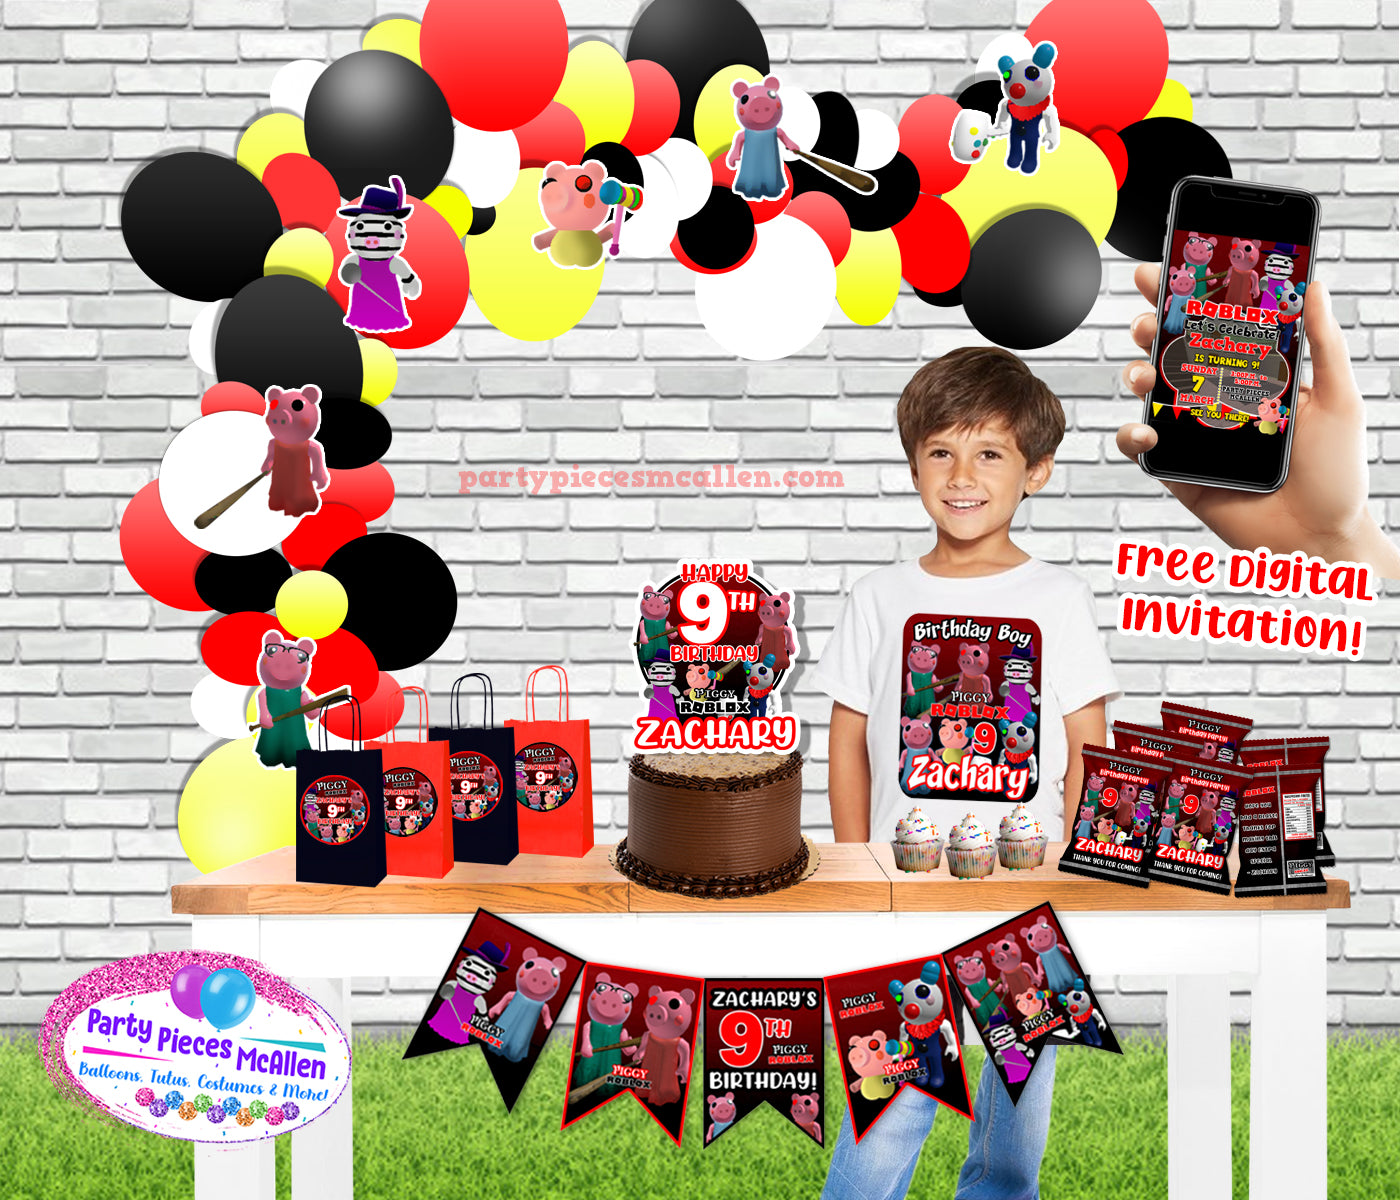 Roblox Birthday Boy Invitation Mobile Phone Text Roblox Party